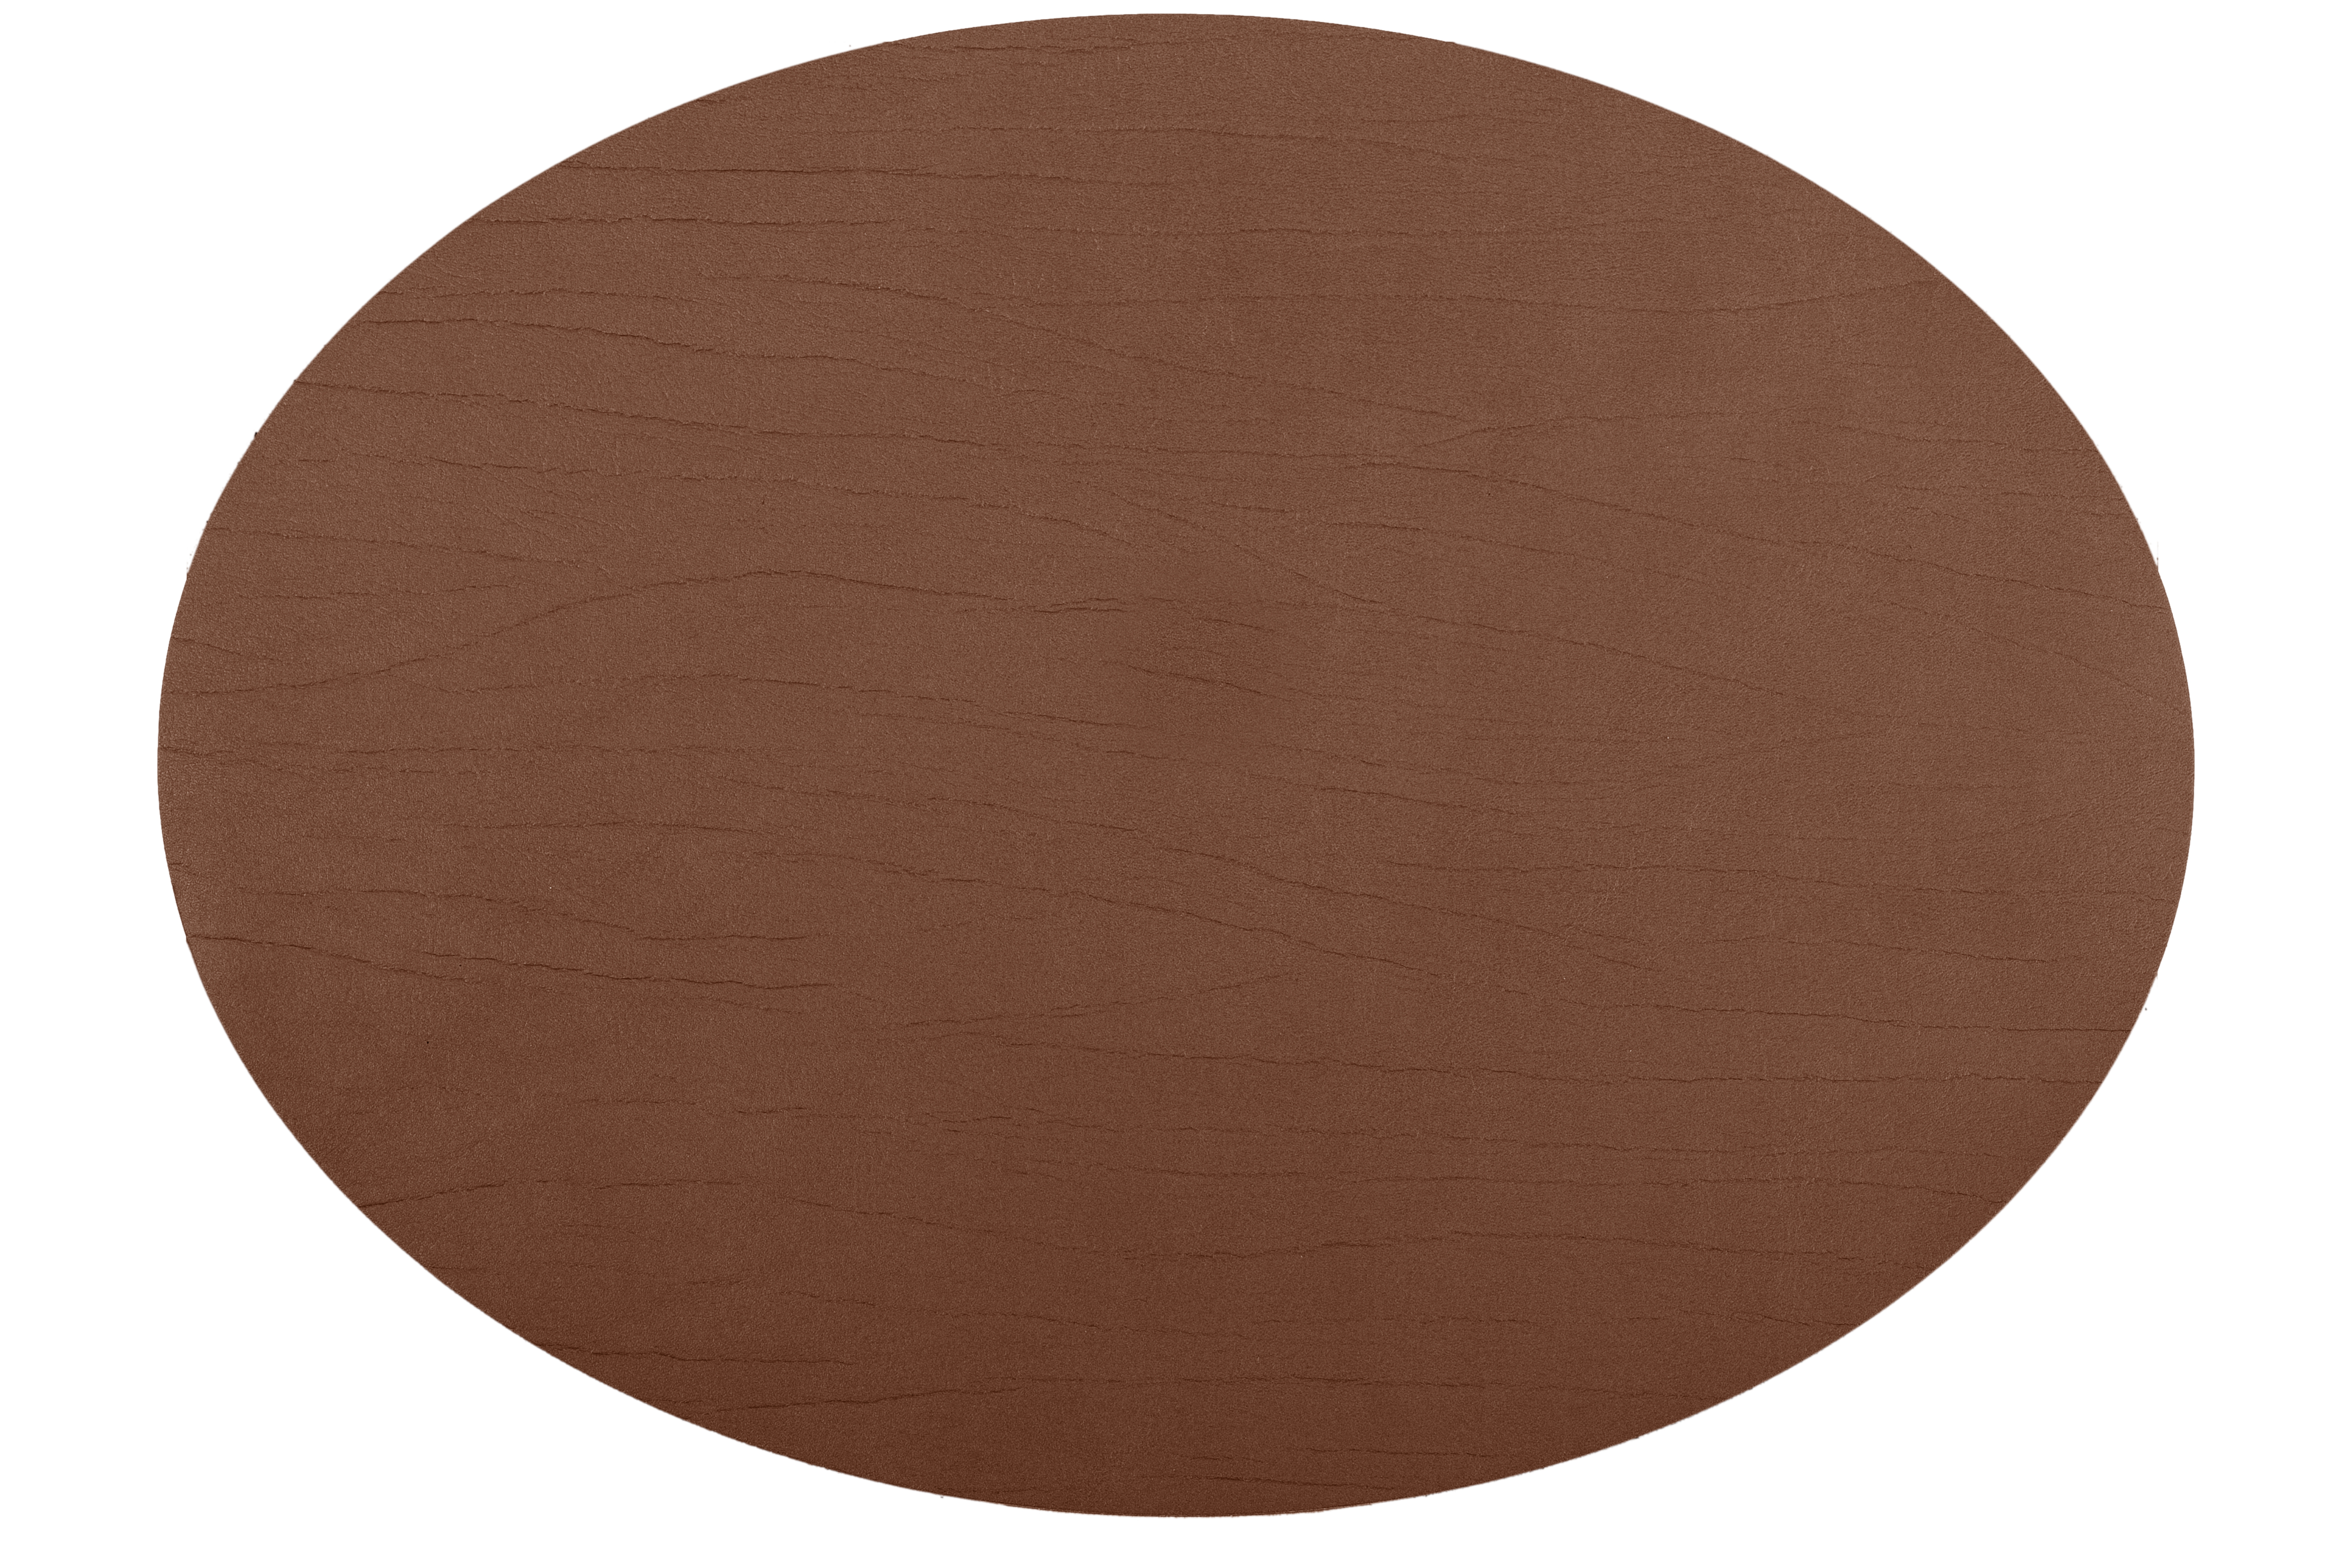 Titan placemat oval, 33x45cm, brown double sided